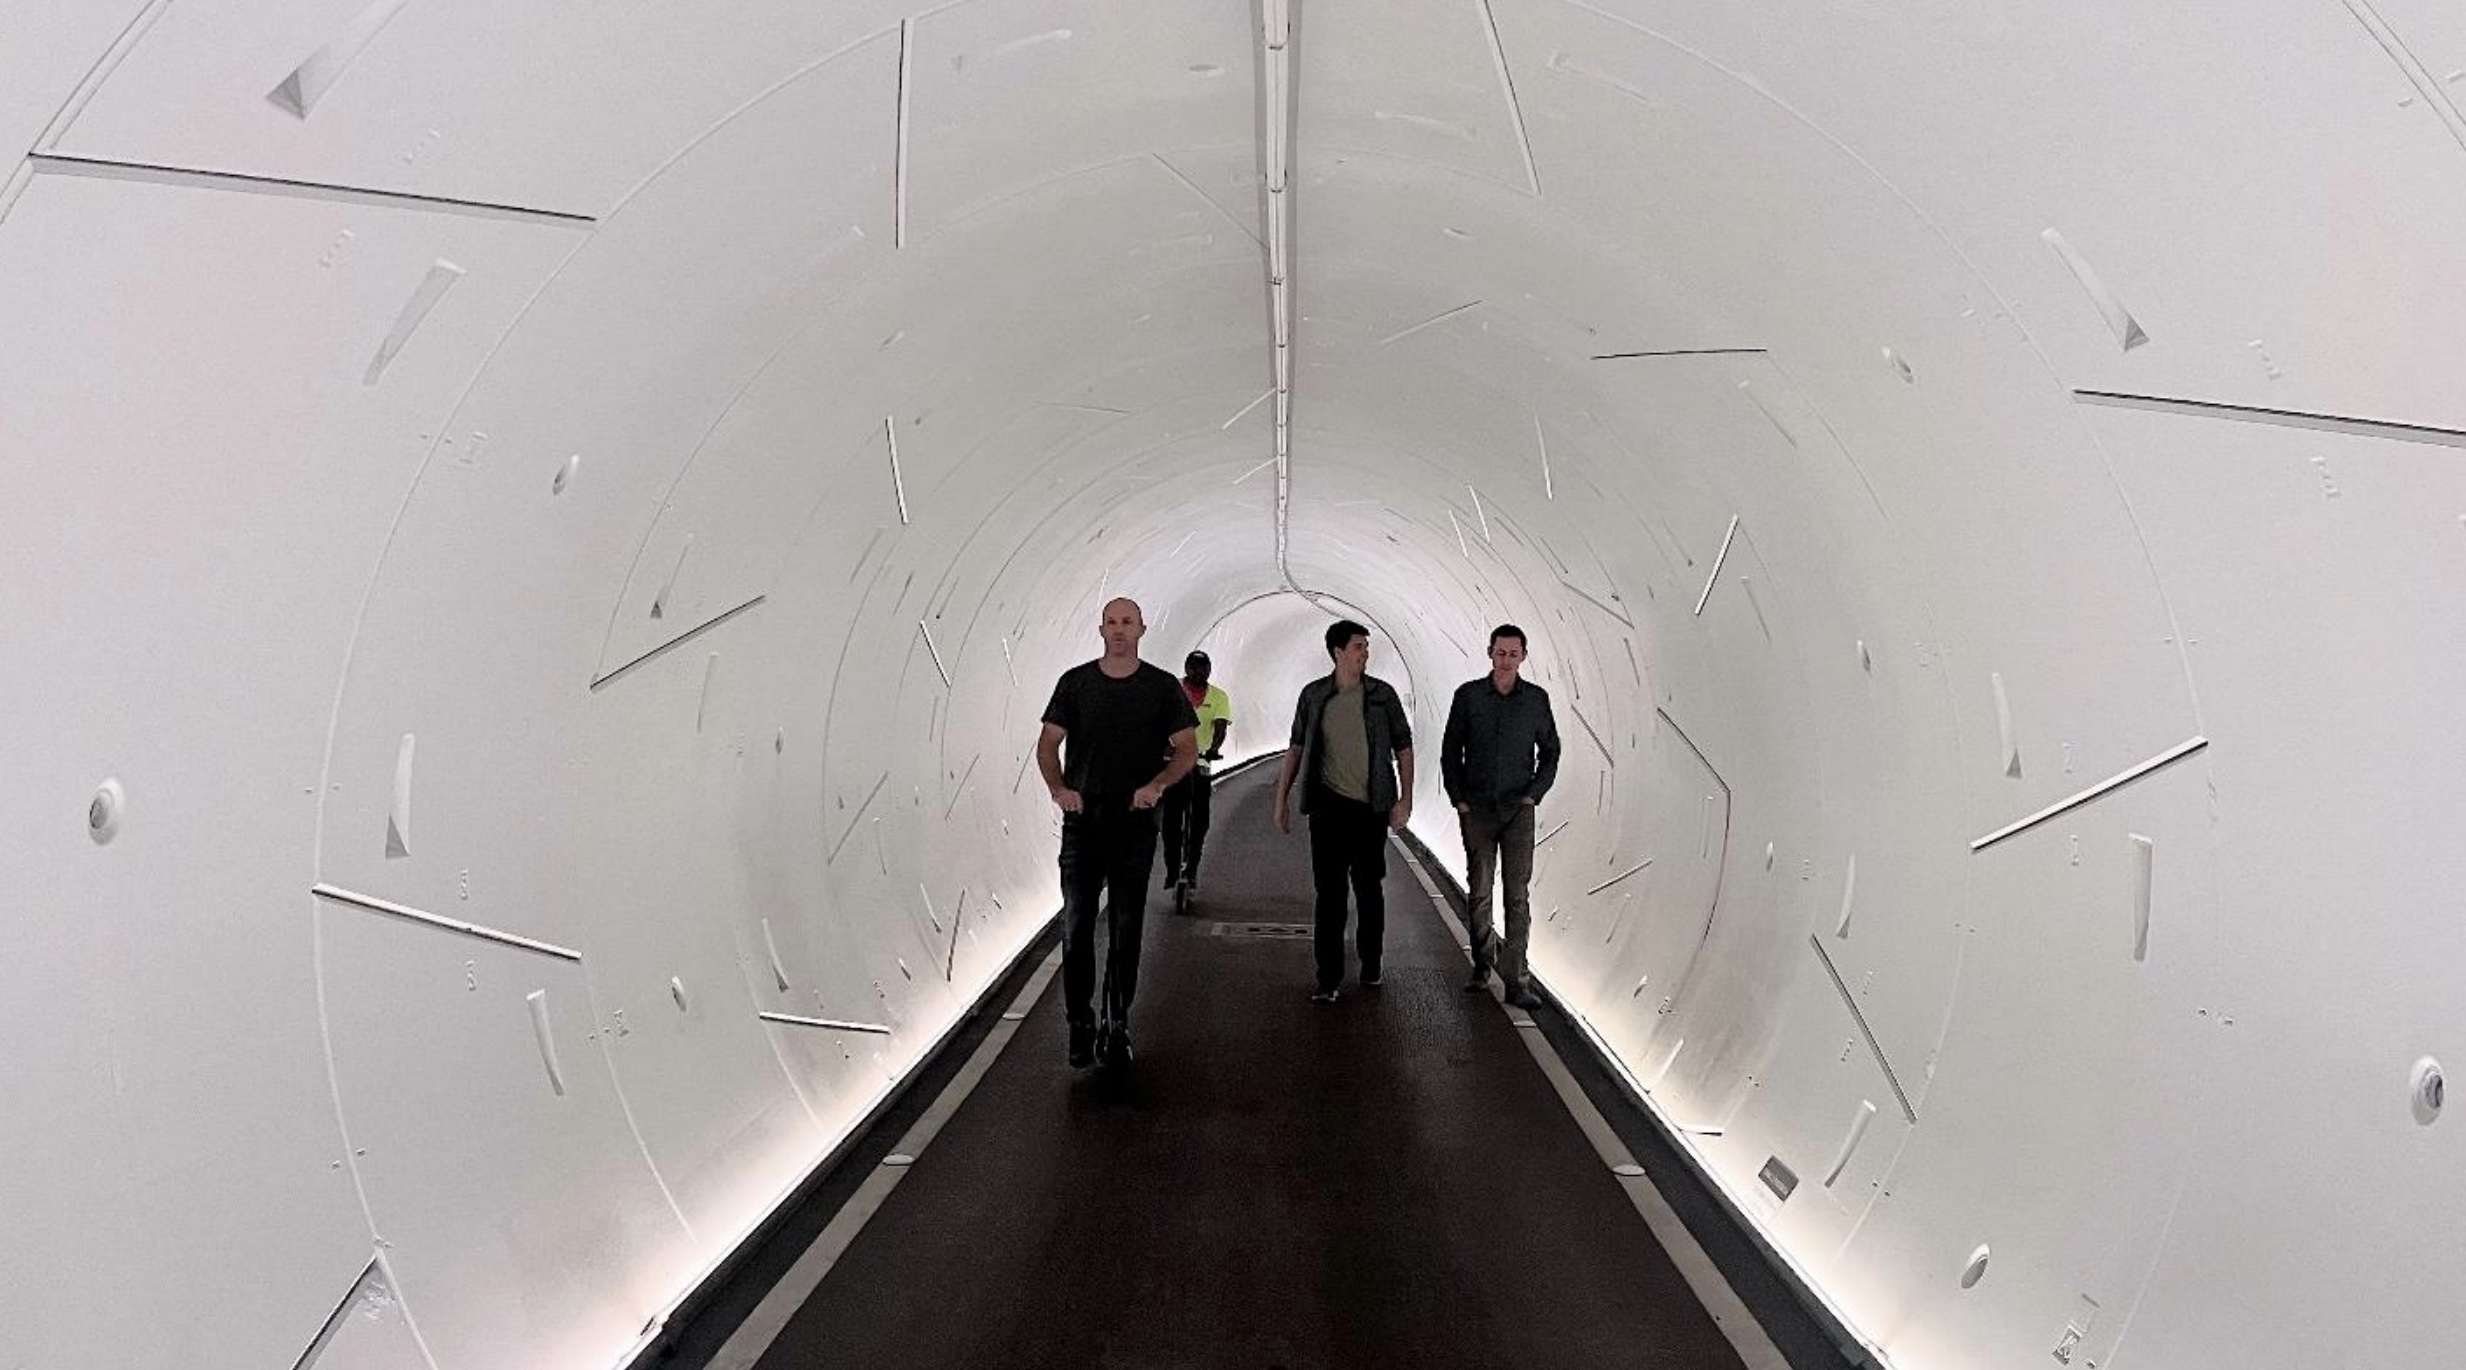 The Boring Company is in talks to build a pedestrian tunnel Texas